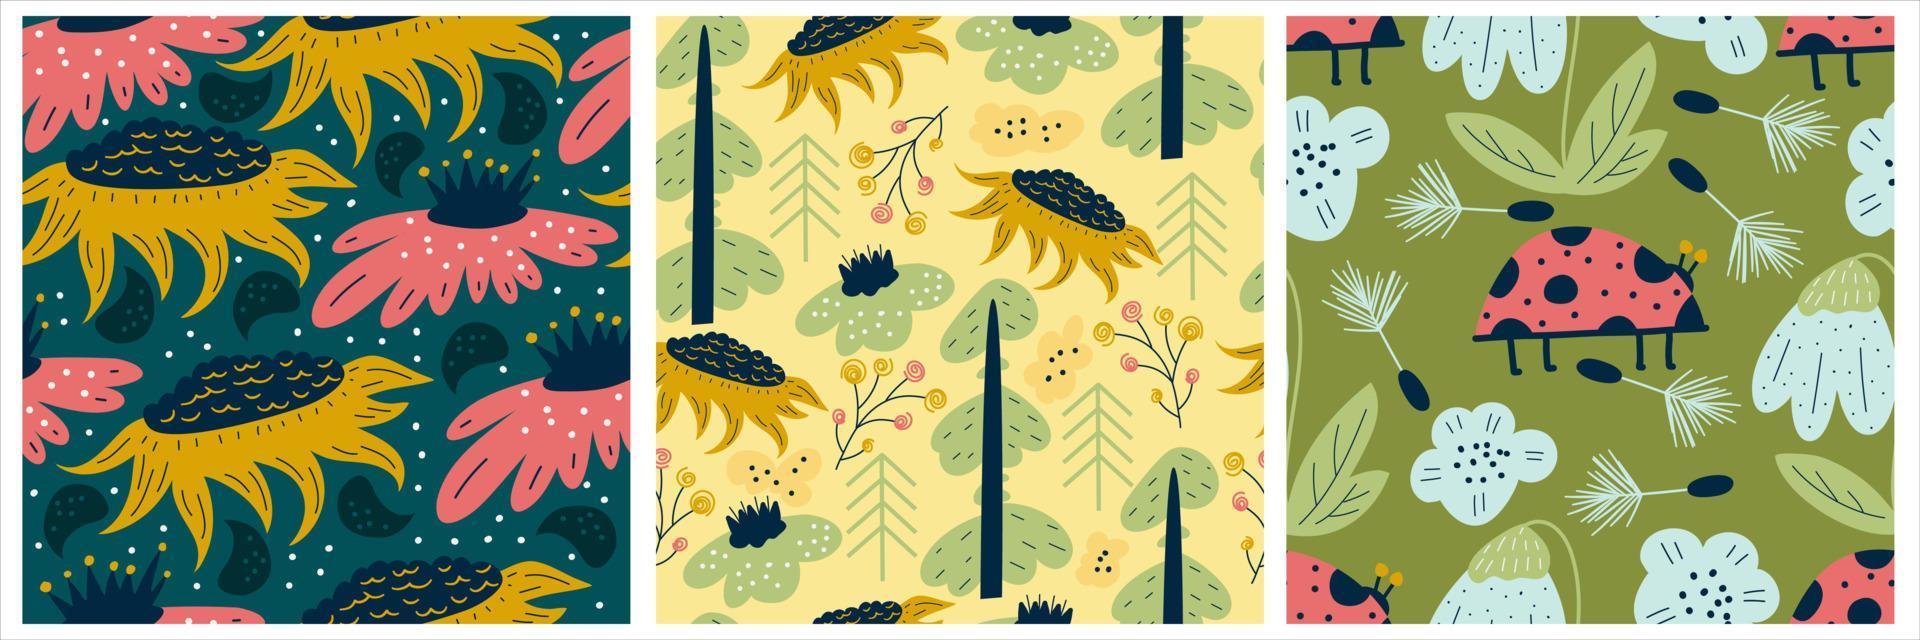 Scandinavian set of spring patterns with sunflowers, ladybugs and tree. Seamless pattern with insects and flower. Vector illustration design. Summer floral scandinavian nursery print design